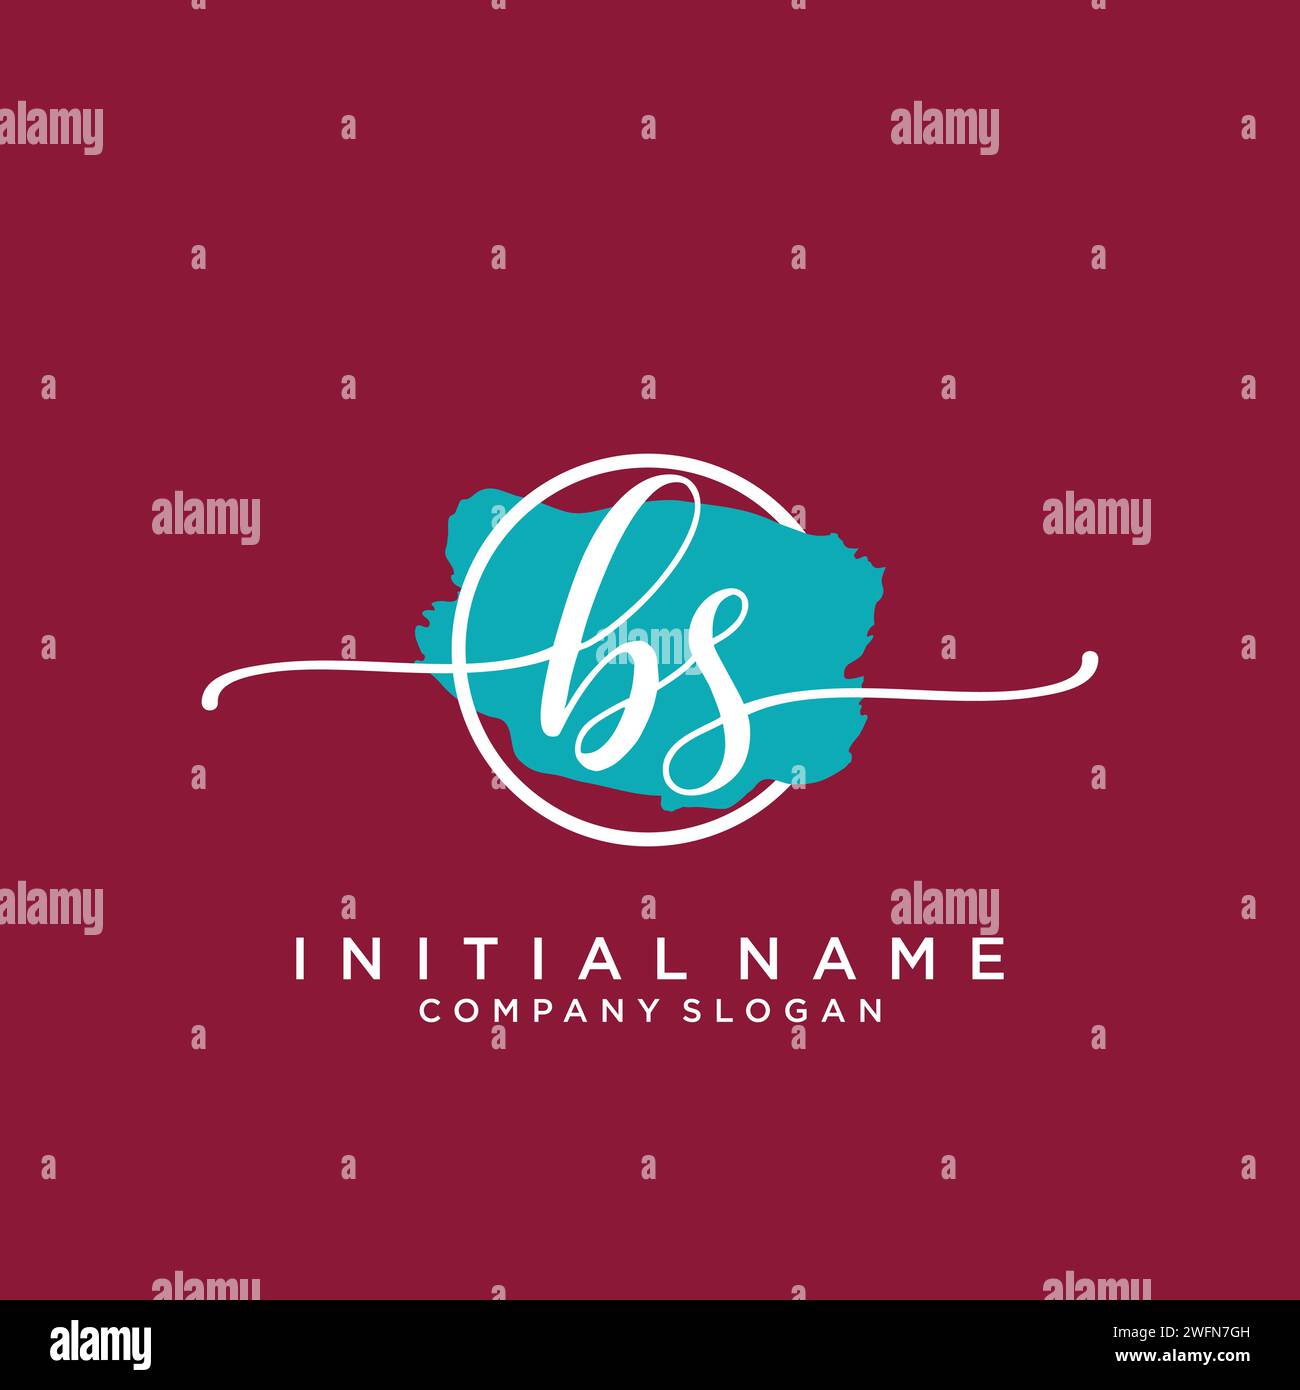 BS Initial handwriting logo with circle Stock Vector